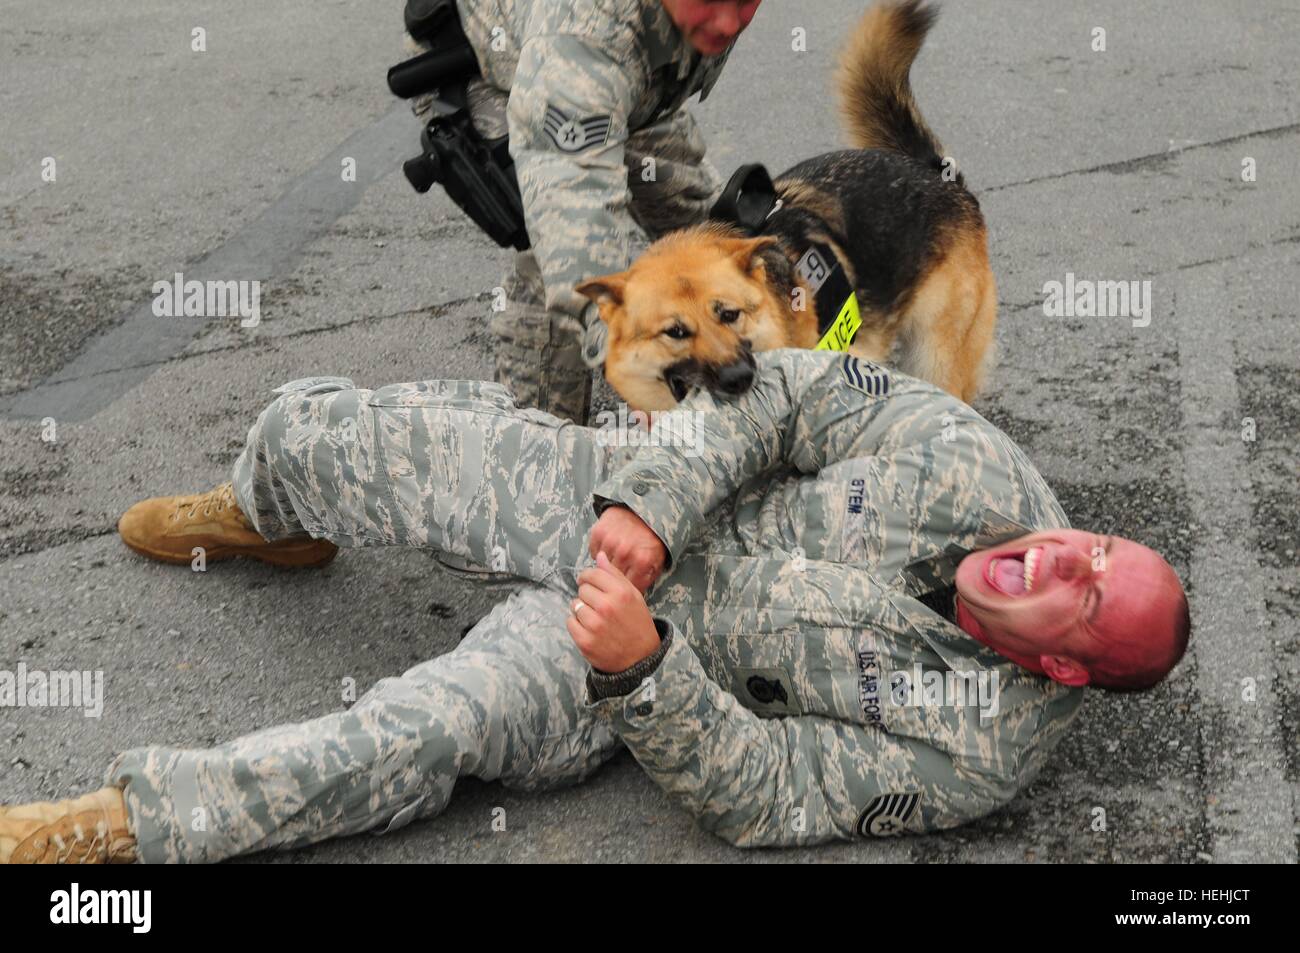 Military working dog Zena attacks a mock bank robber during a Local Operational Readiness Exercise simulation at the Kadena Air Force Base May 12, 2009 in Okinawa, Japan. Stock Photo